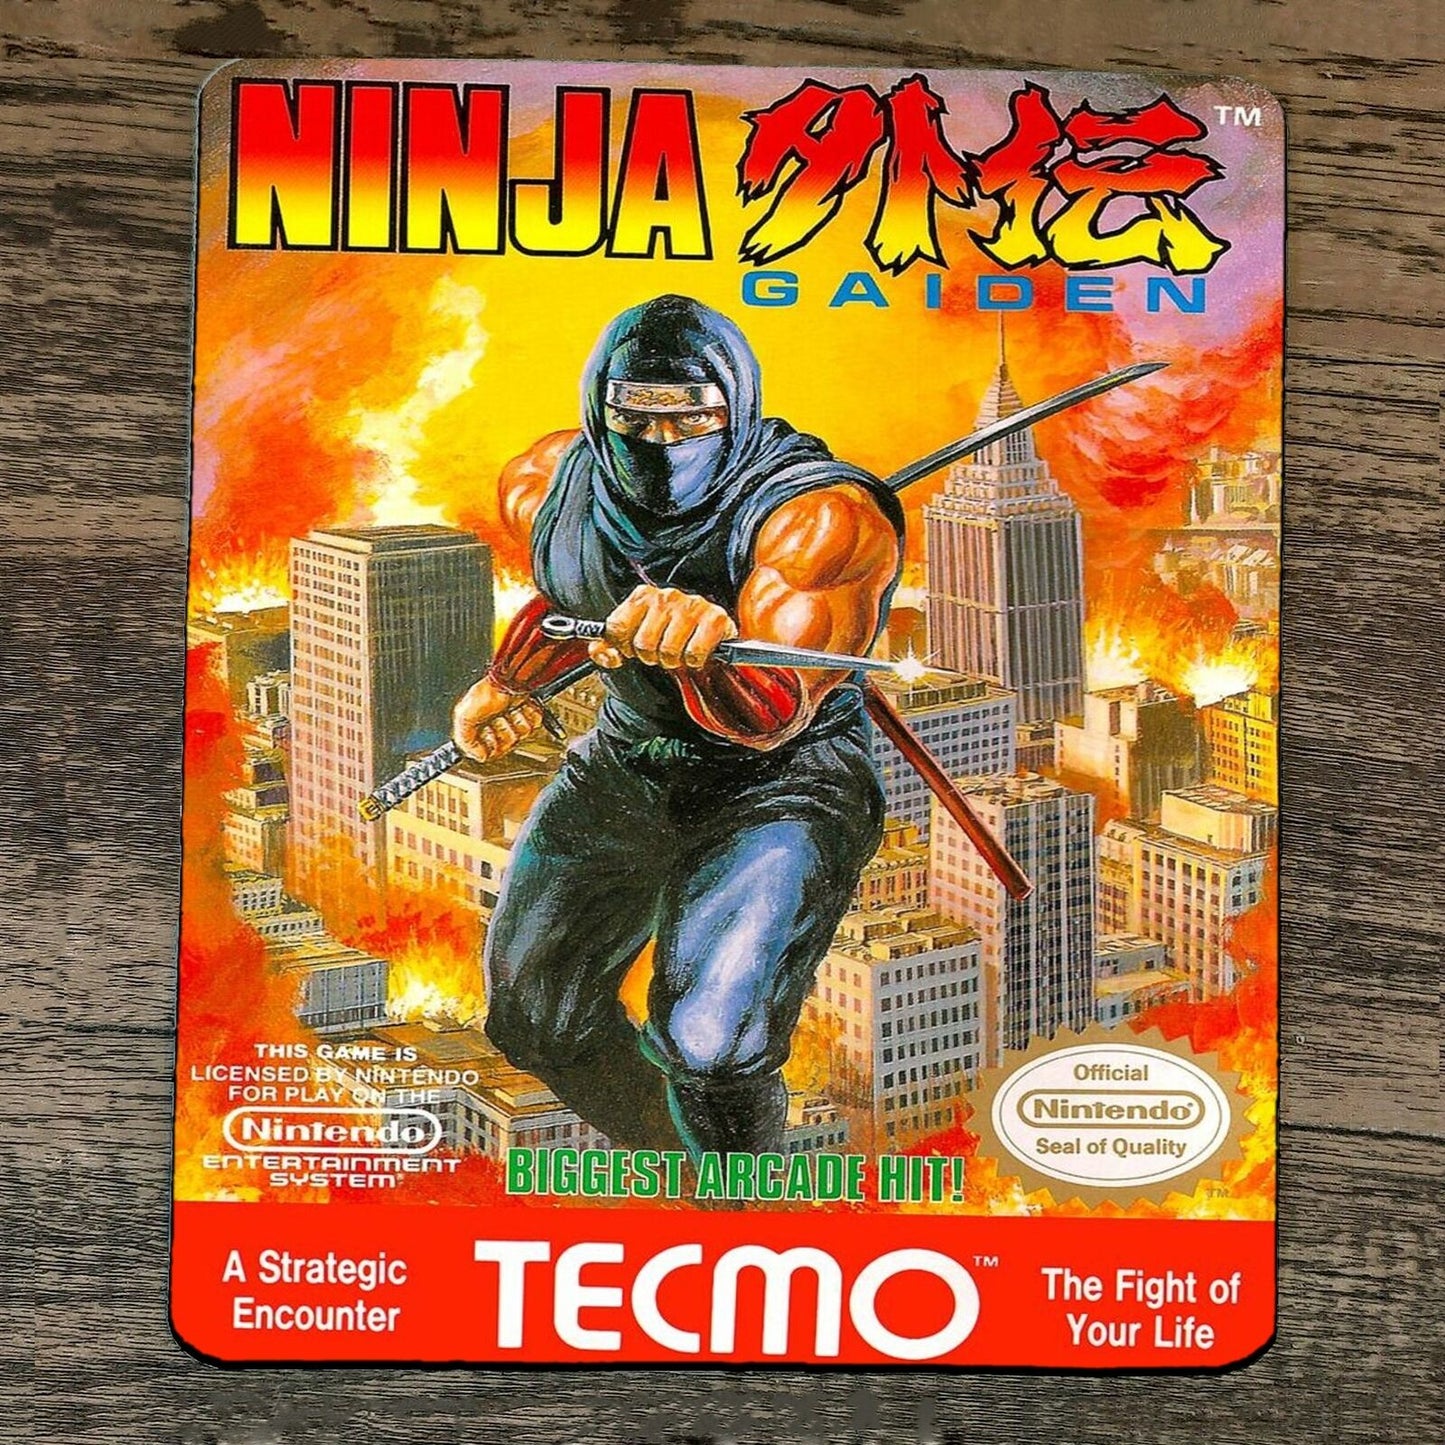 Mouse Pad Ninja Gaiden Classic Arcade Video Game NES Box Cover